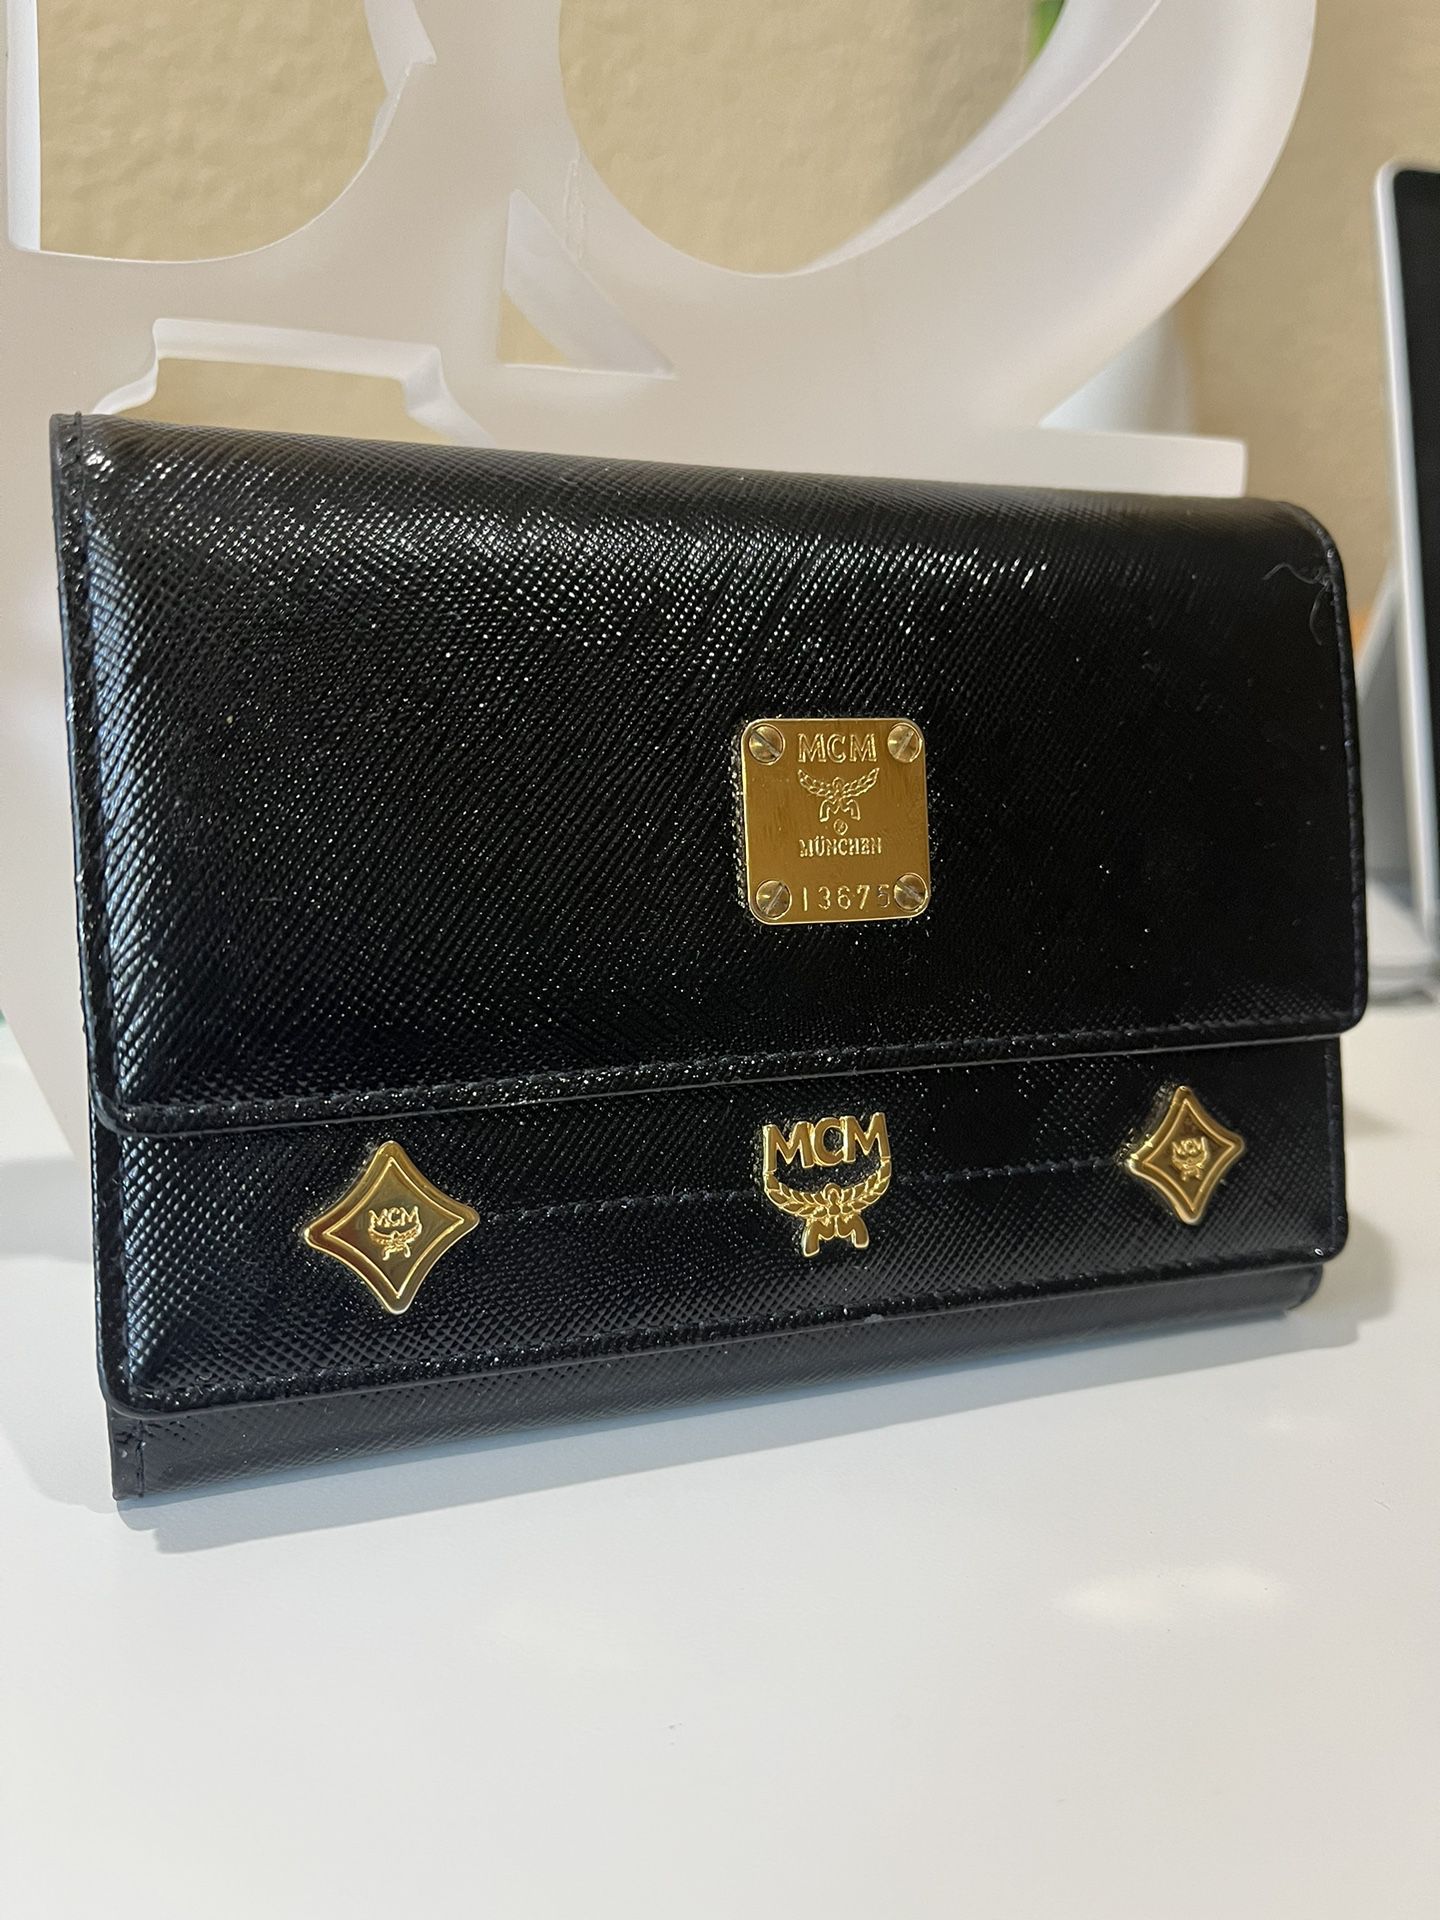 MCM Trifold Wallet for Sale in Vacaville, CA - OfferUp